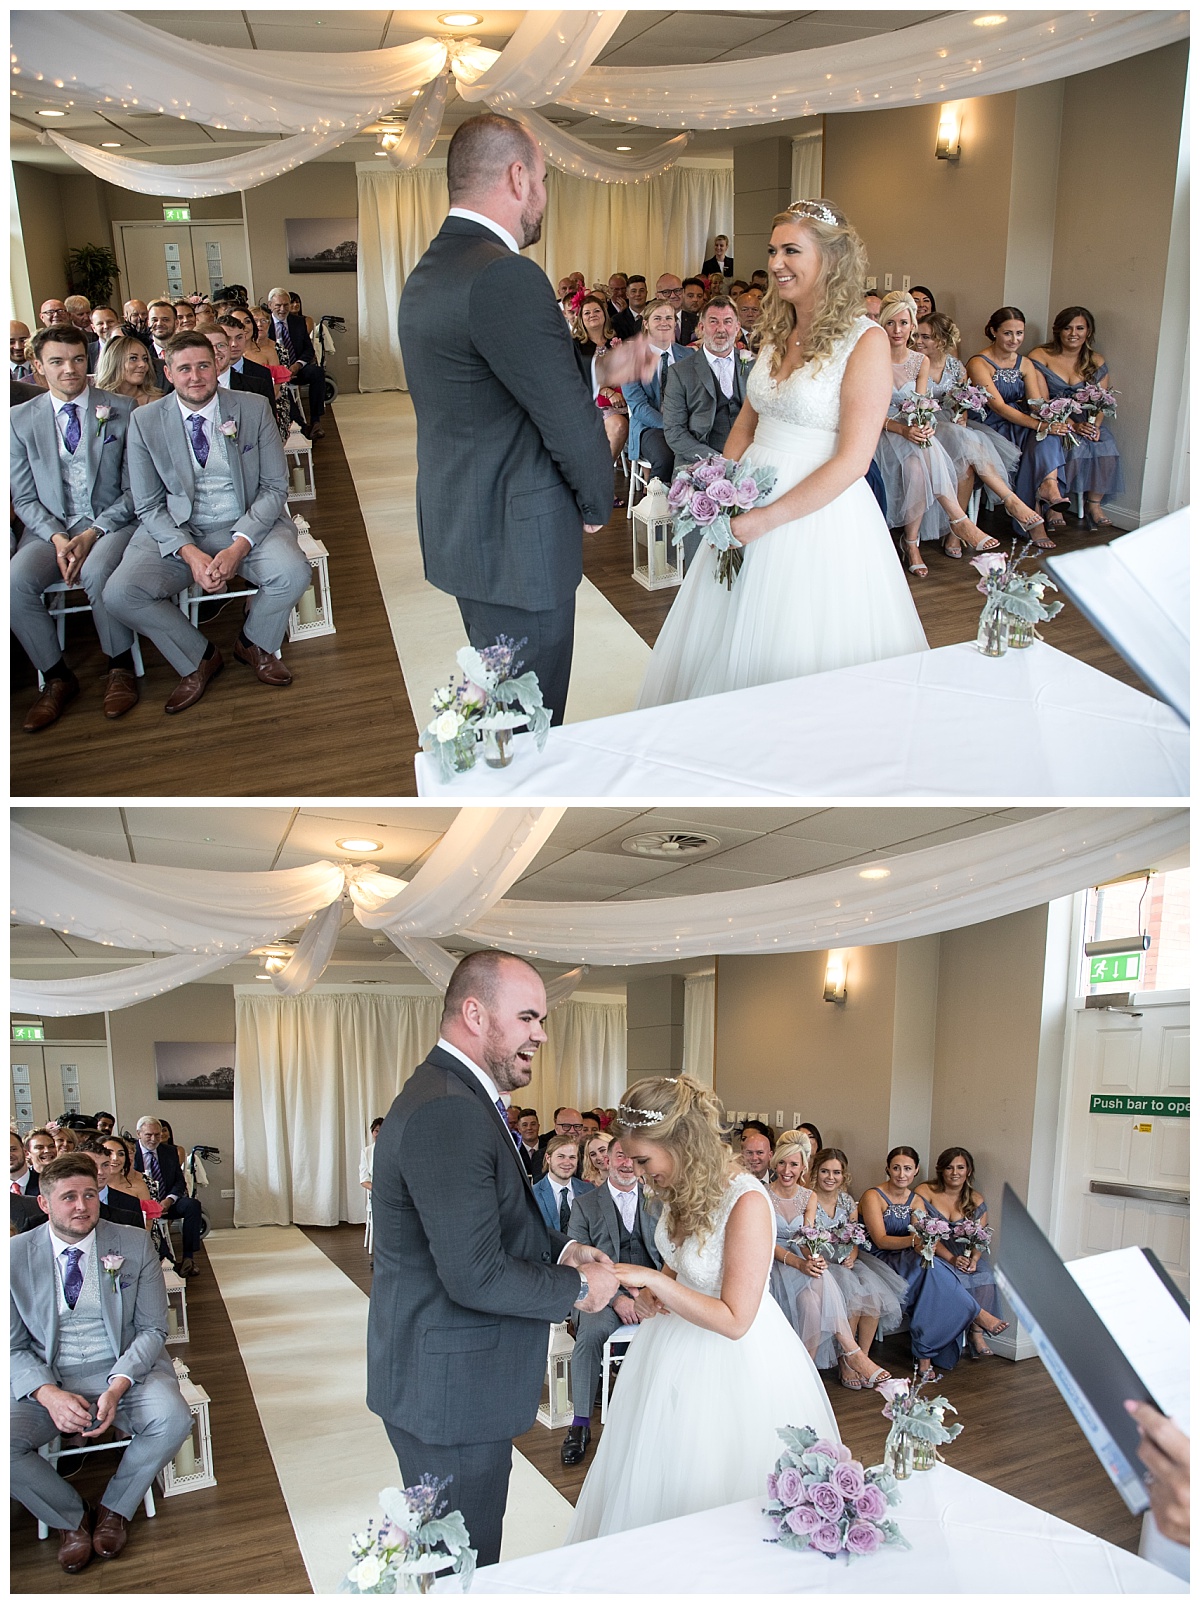 Wedding Photography Manchester - Sam and James's Cheadle House Wedding 42